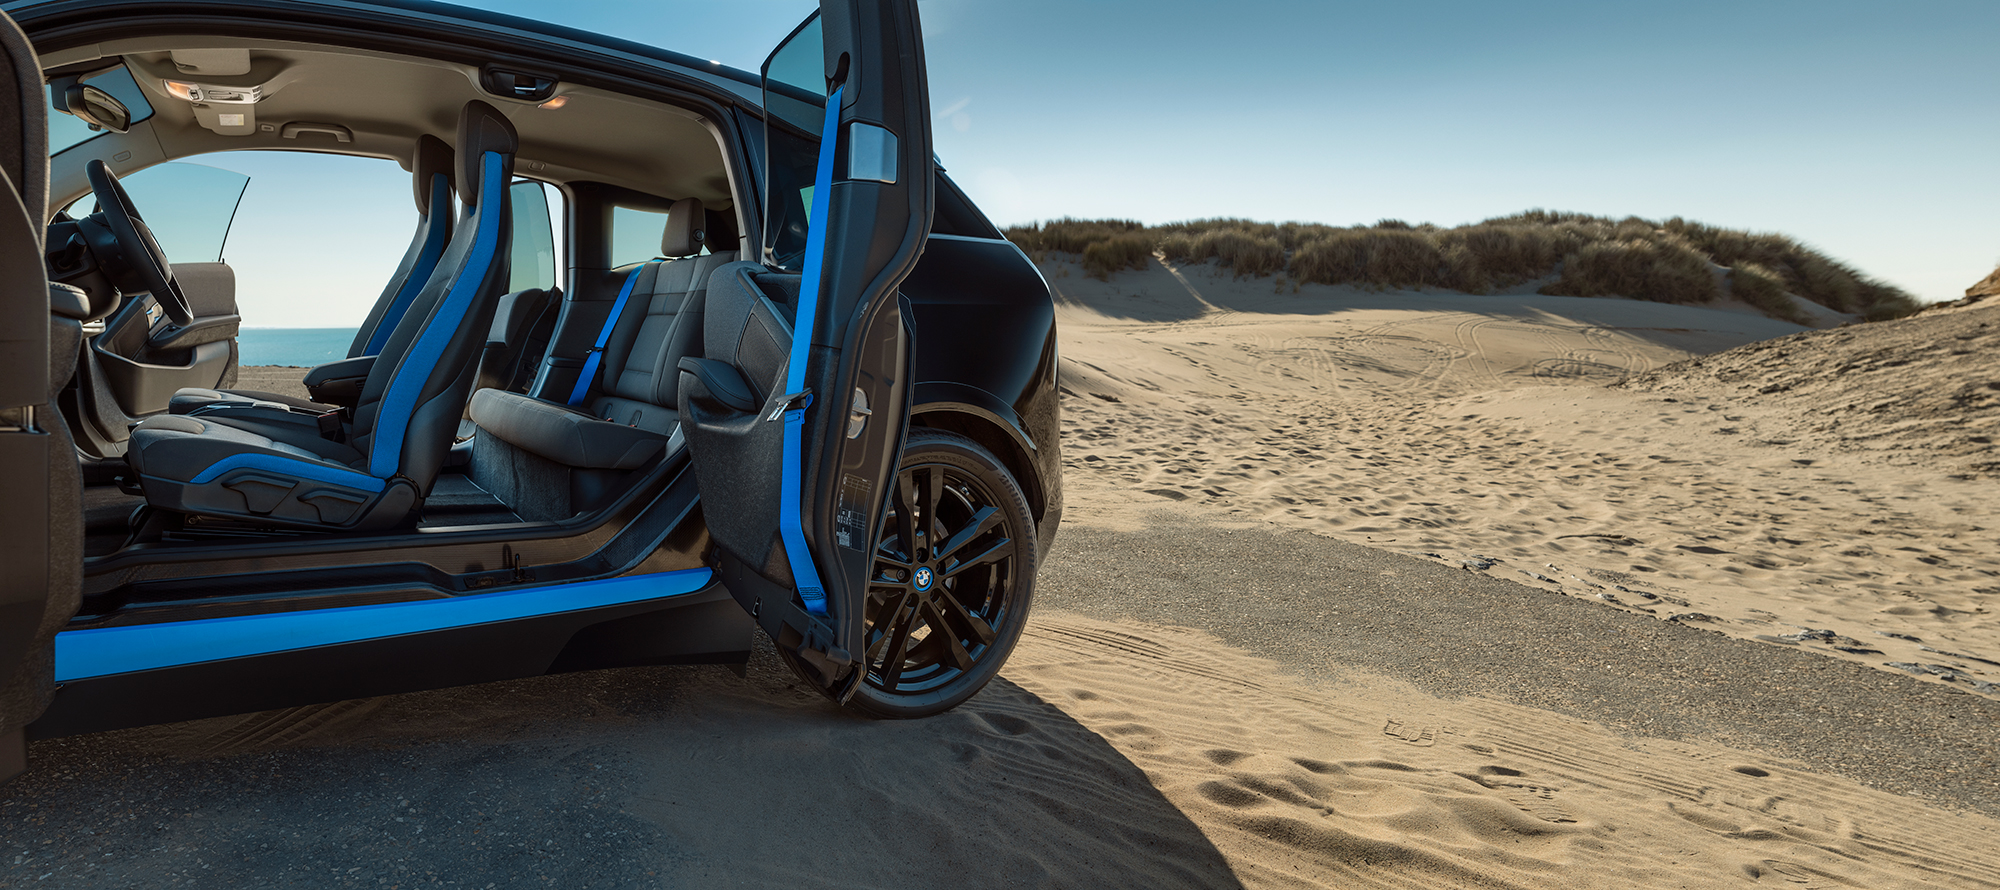 gijs spierings 2020 bmw i3 for the oceans 8